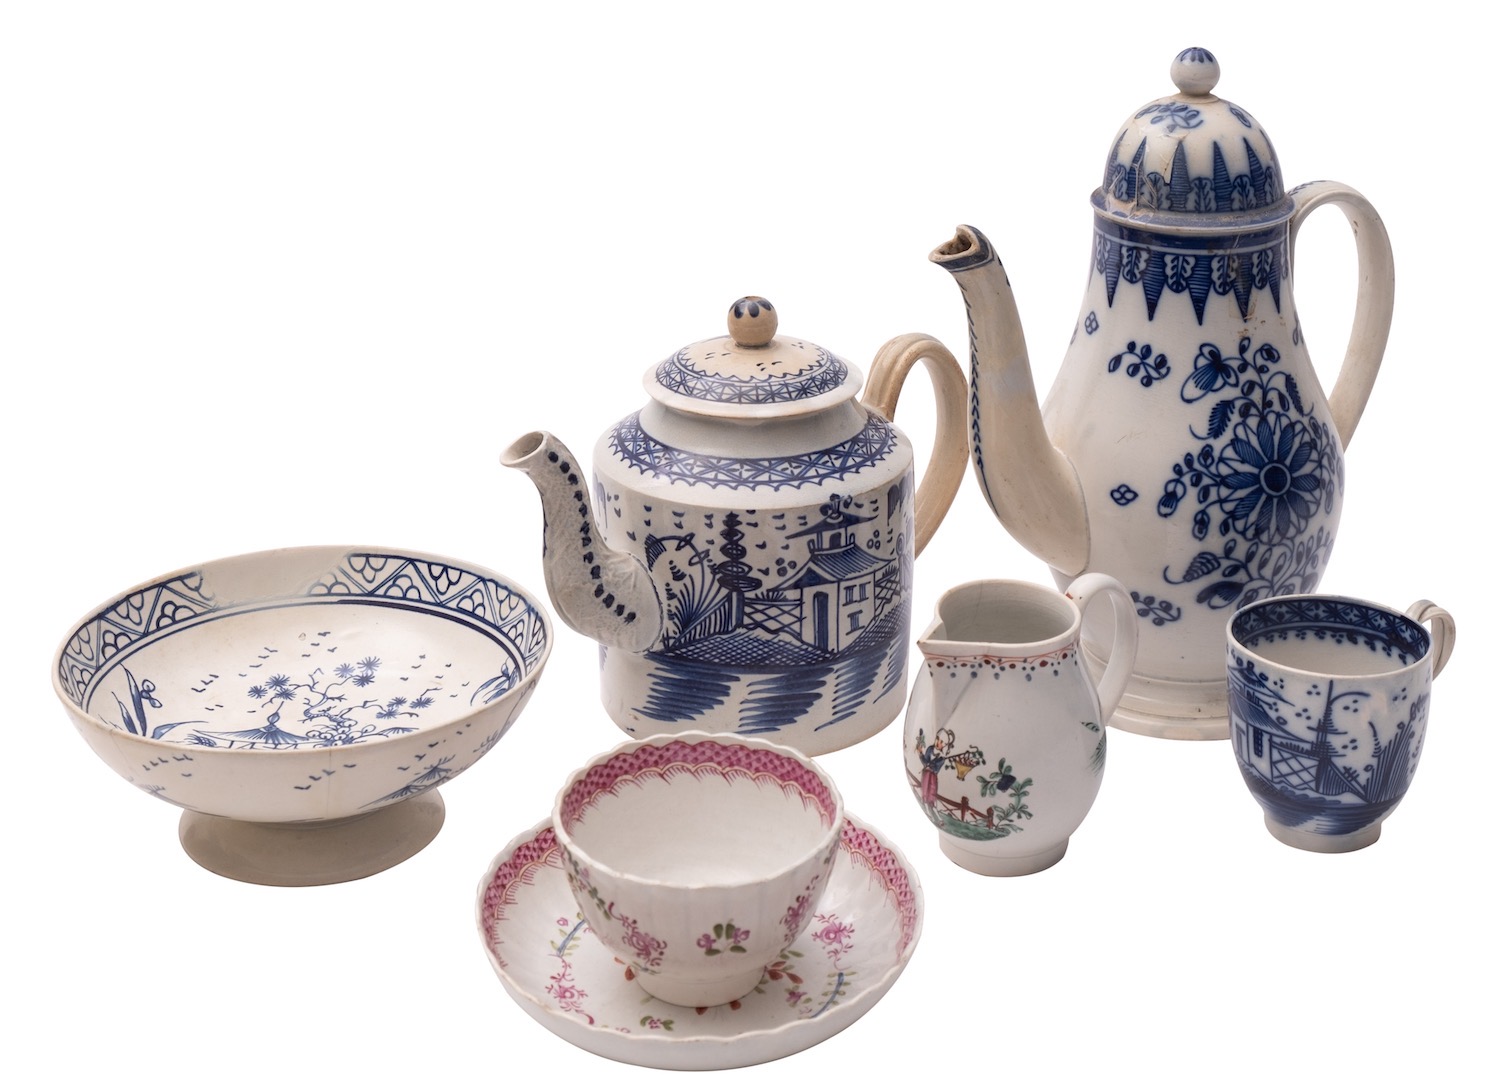 A mixed lot of late 18th/early 19th century English pearlware including a coffee pot and cover;